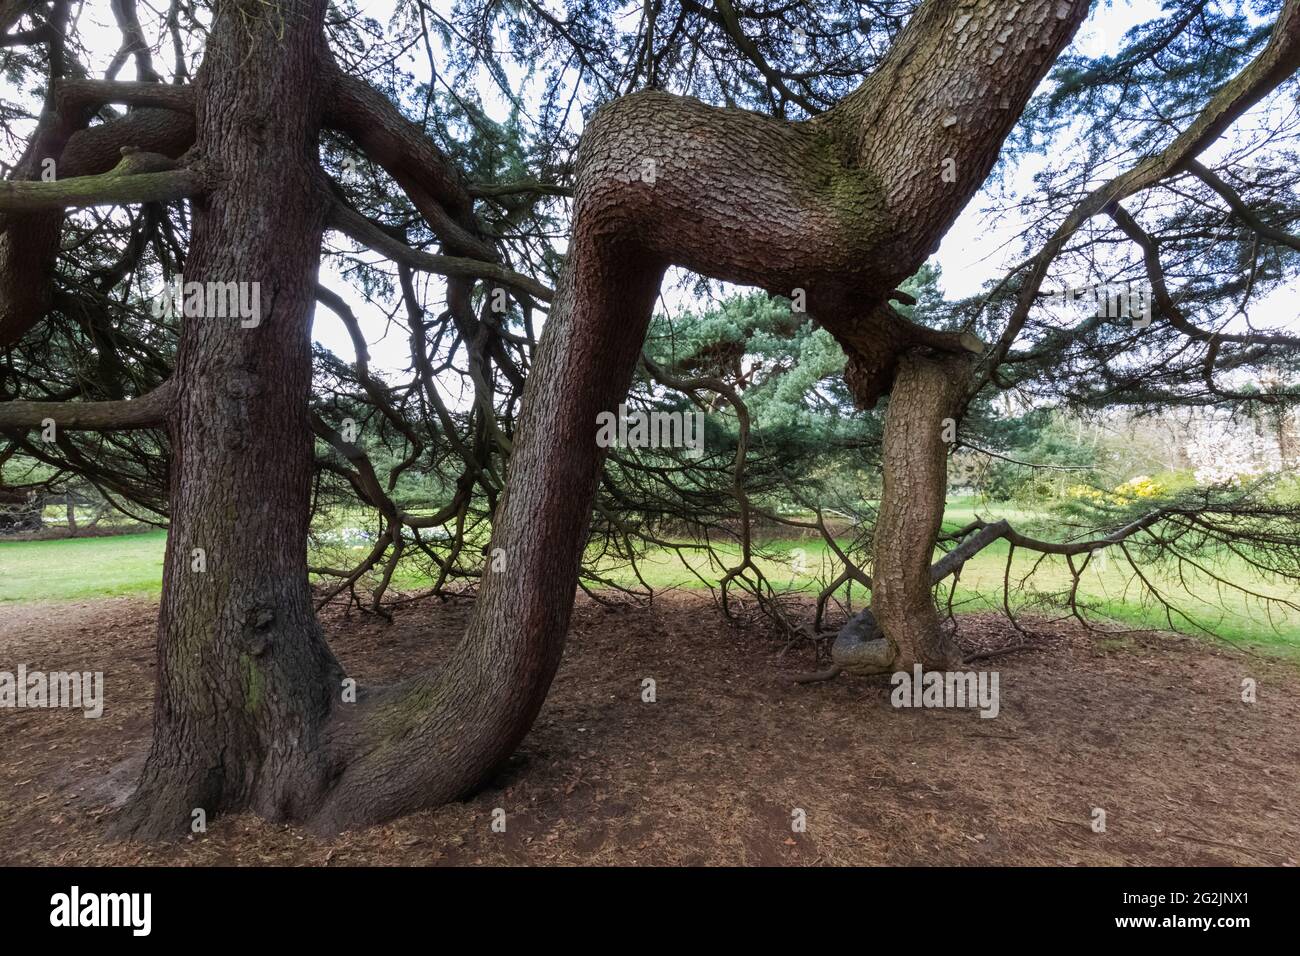 England, London, Greenwich, Greenwich Park, The Flower Garden, Twisted Branches of White Pine Tree Stock Photo